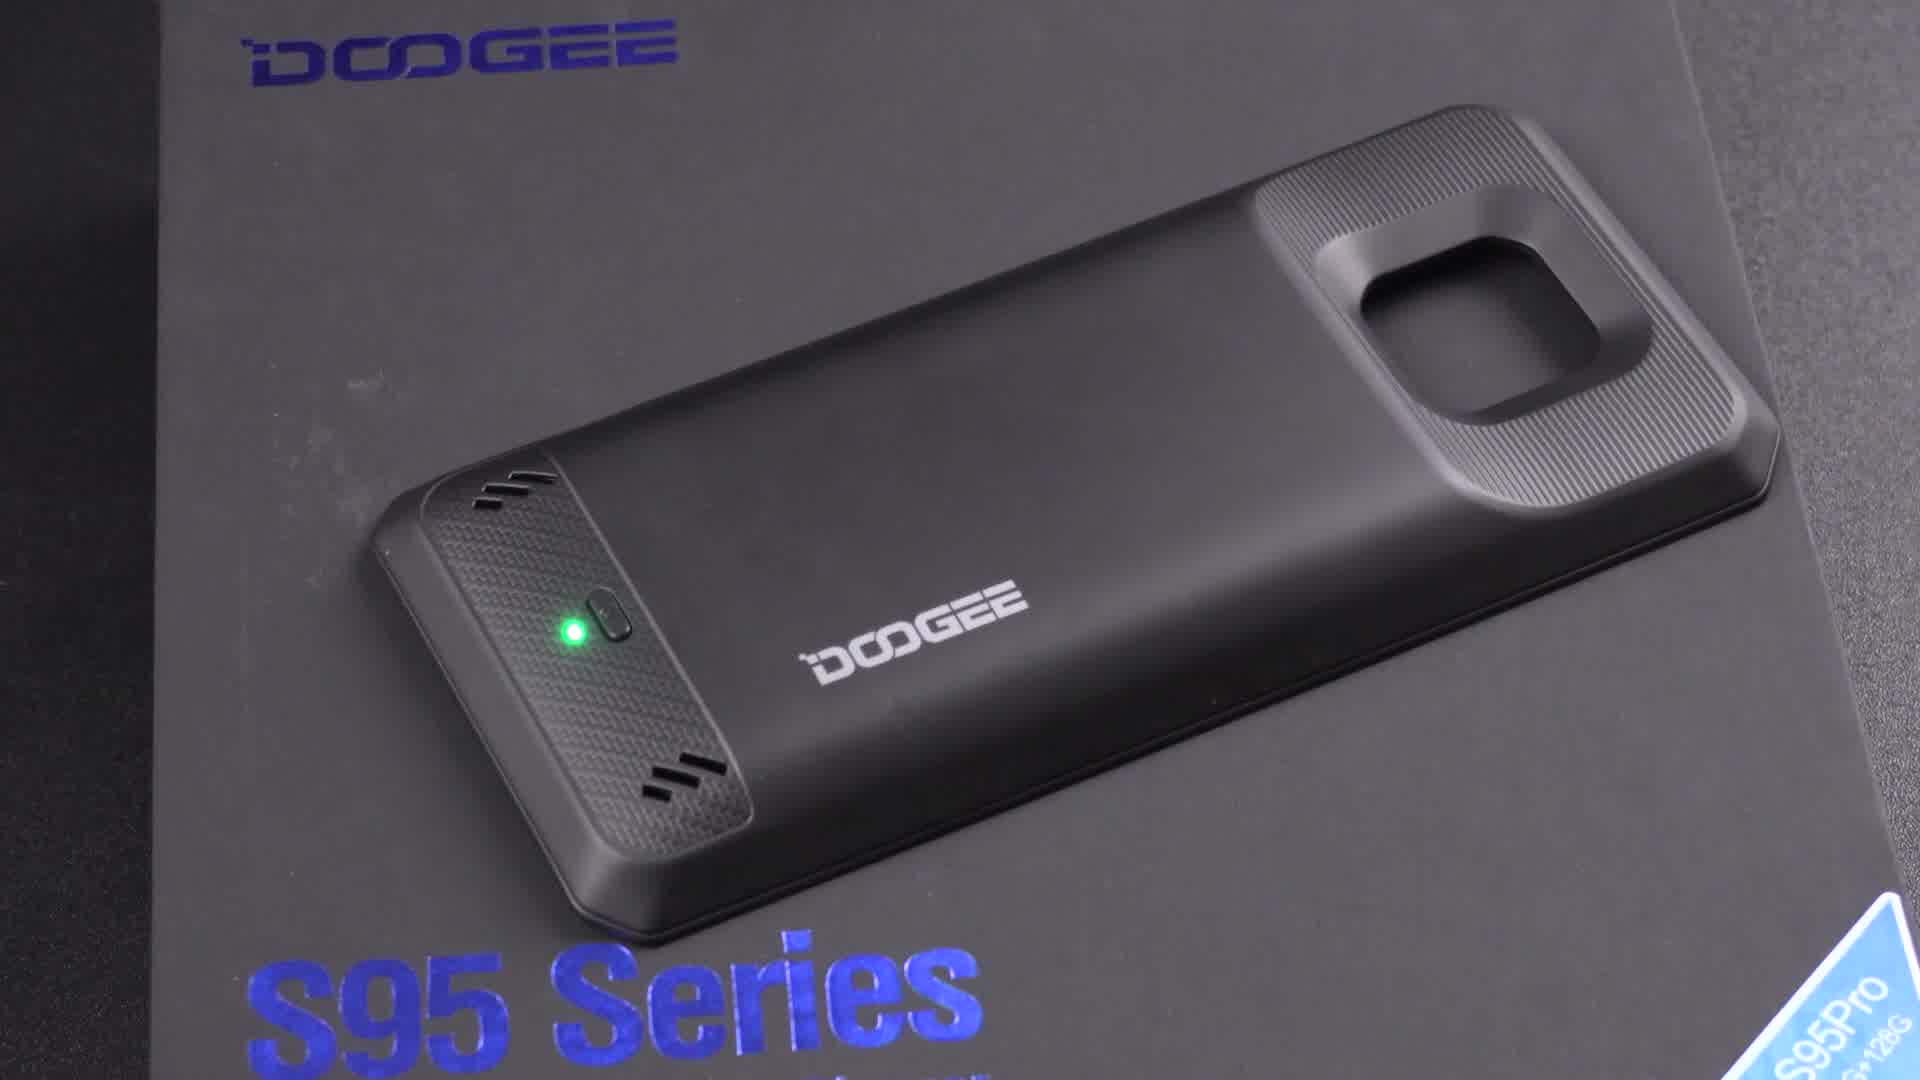 The Doogee S95 Pro Is A Rugged Phone That Can Meet - Smartphone - HD Wallpaper 